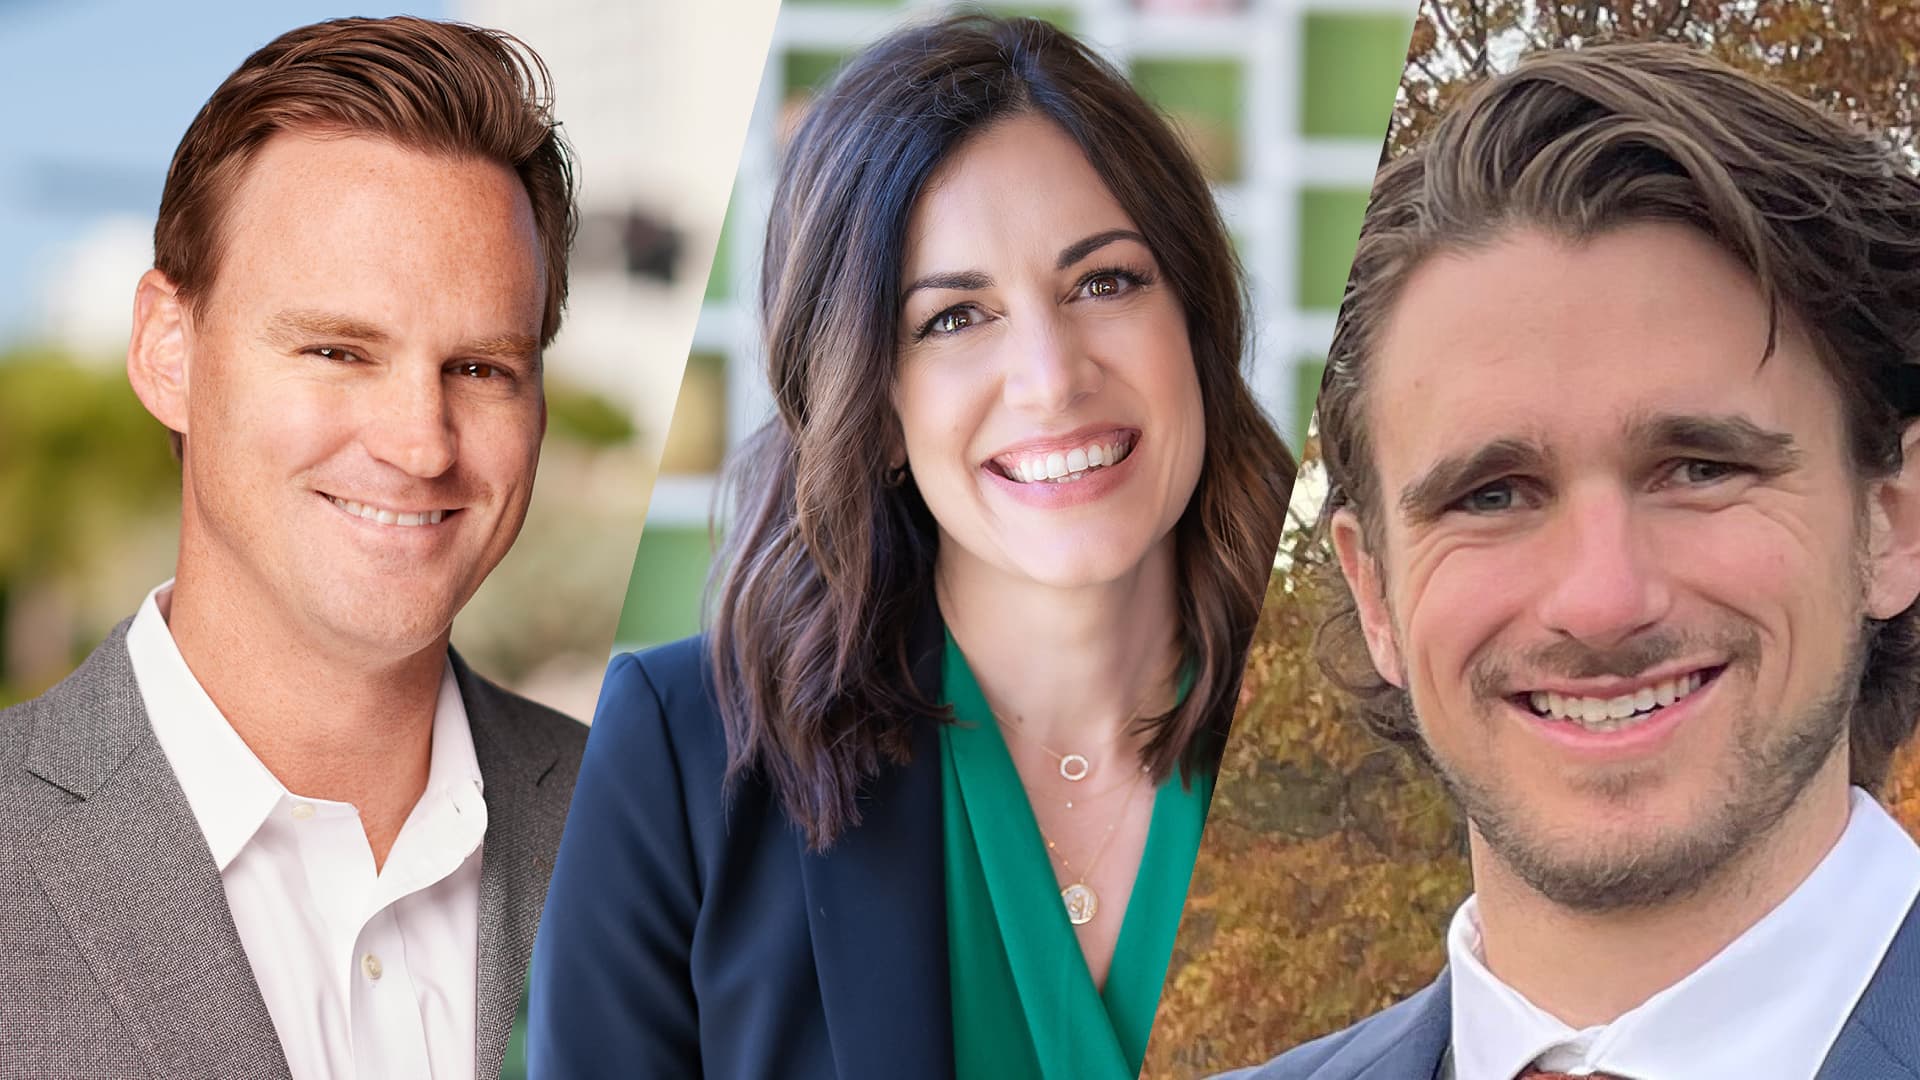 Read full post: PaceMate™ Co-Founders to Speak at HRX 2022, the Heart Rhythm Society’s Cardiovascular Digital Health Summit